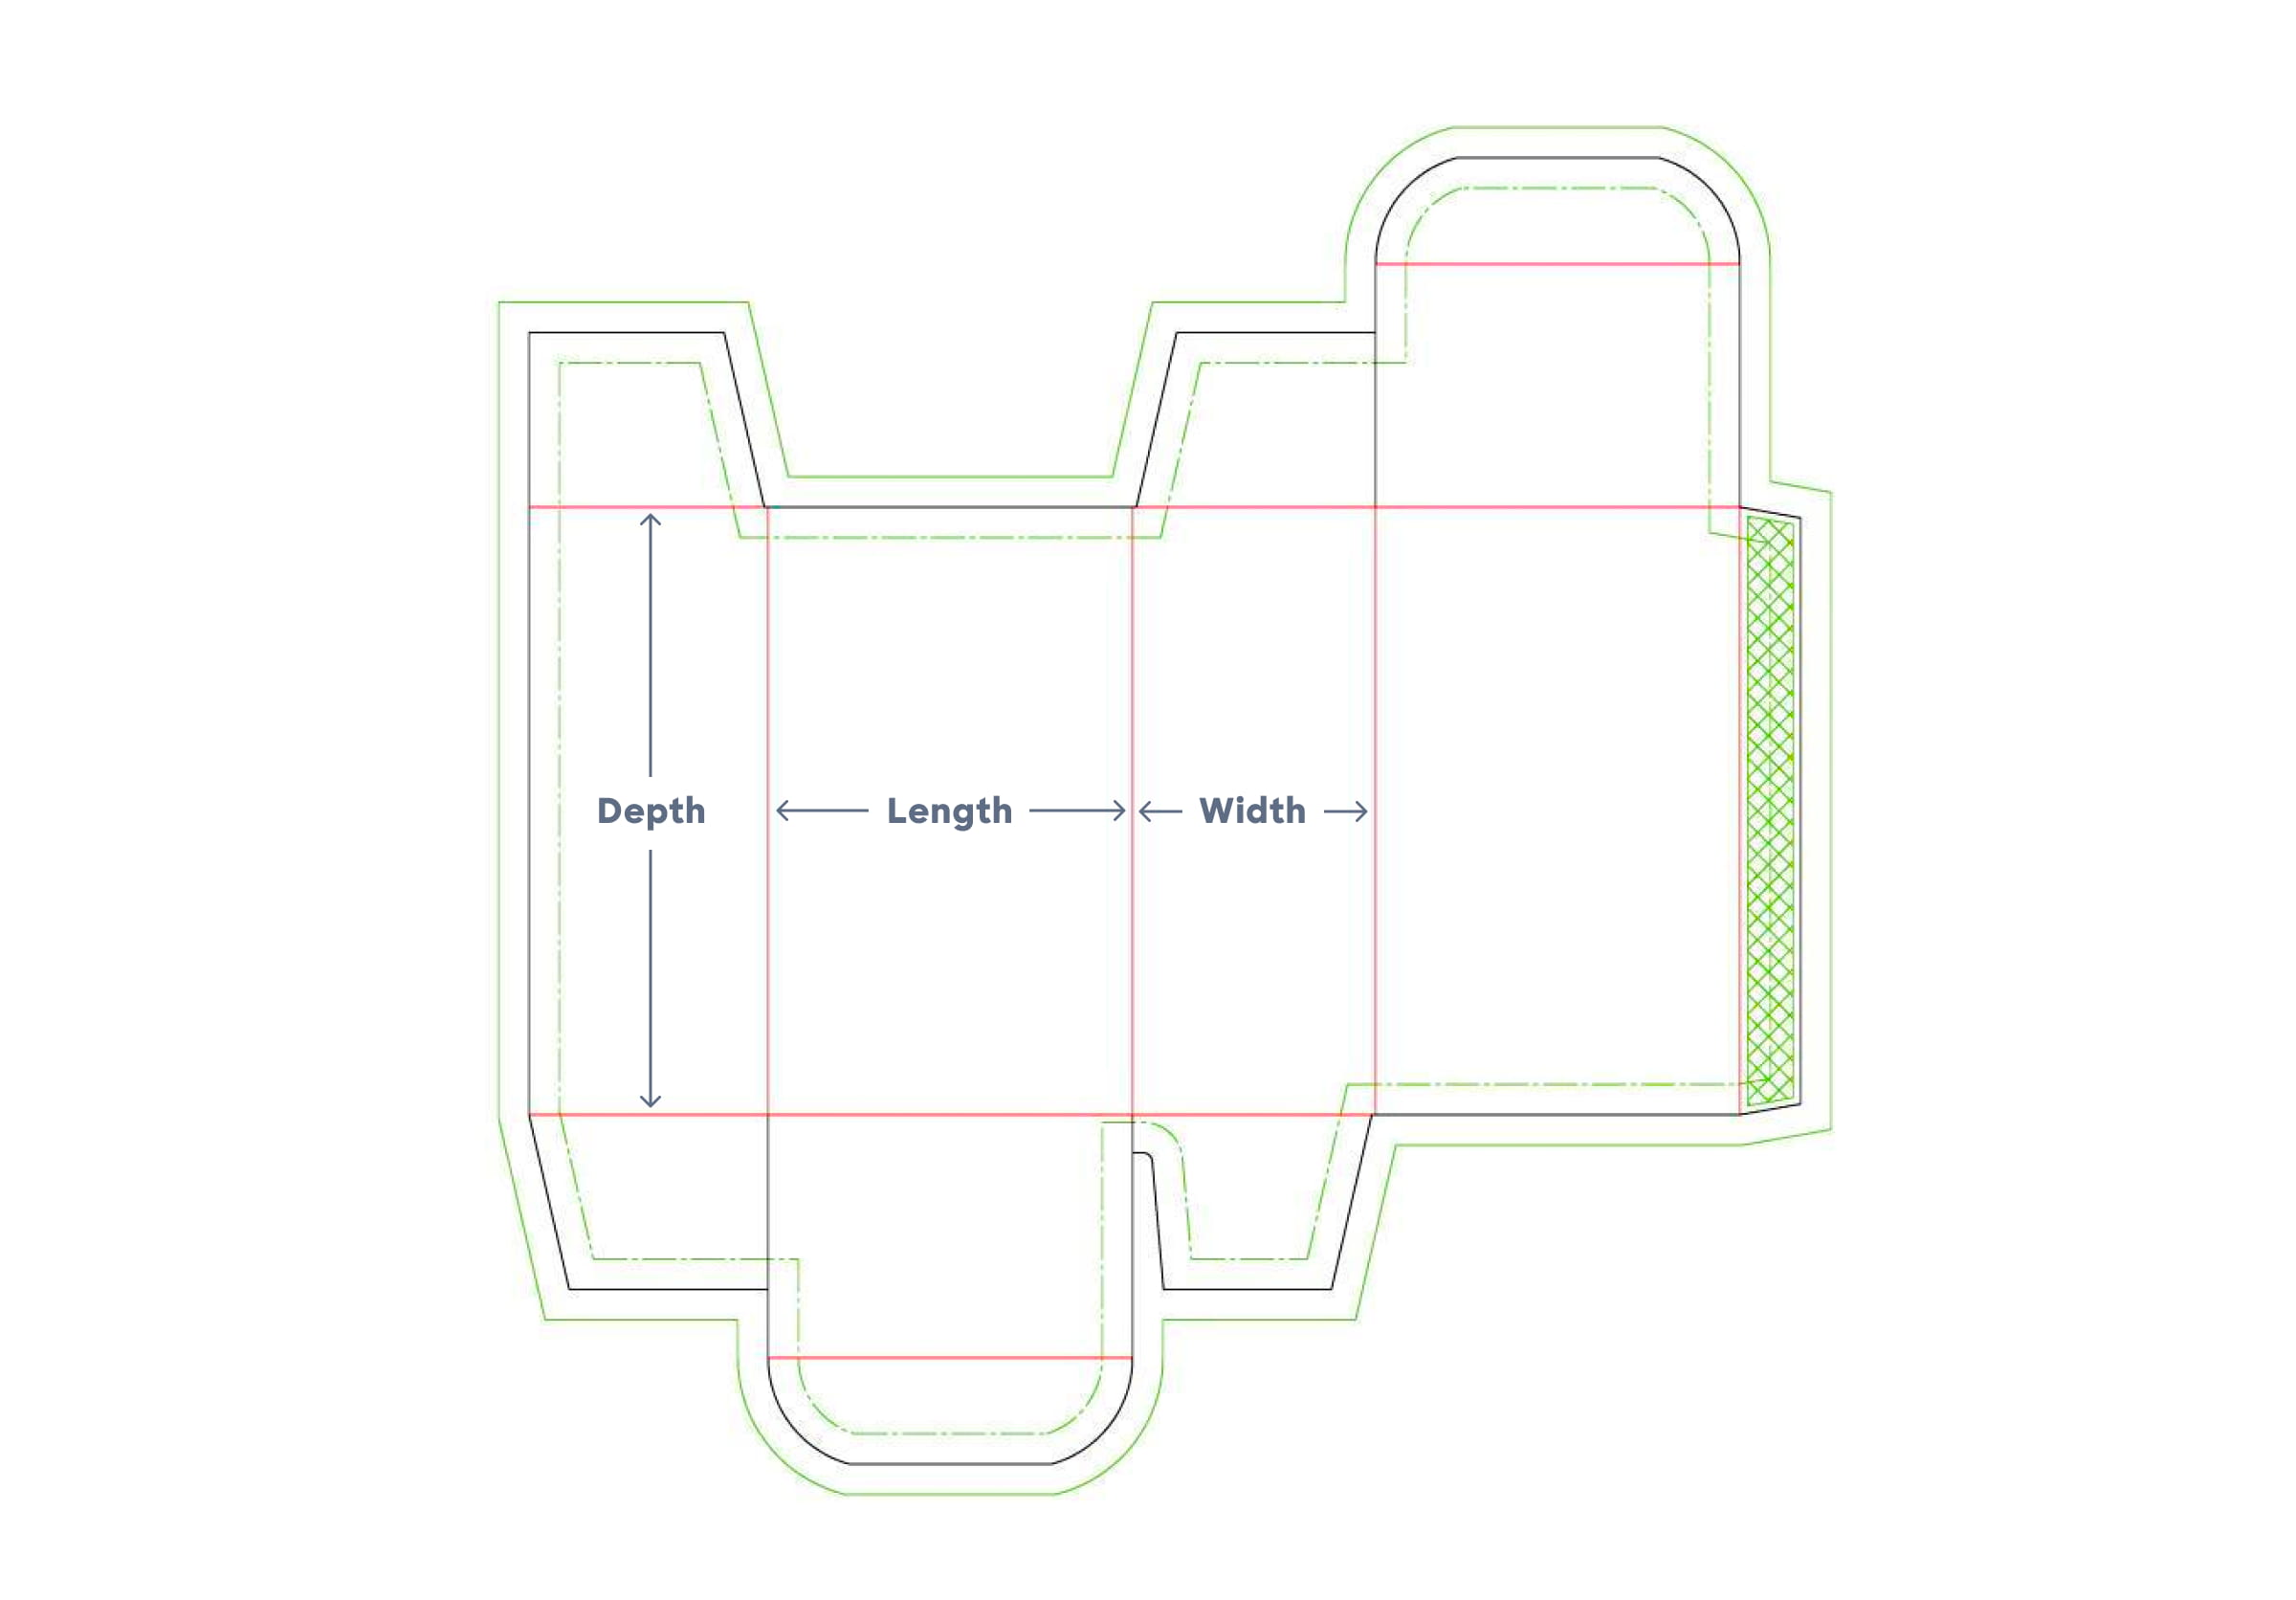 Length, width, depth (or height) of a box in a dieline form.